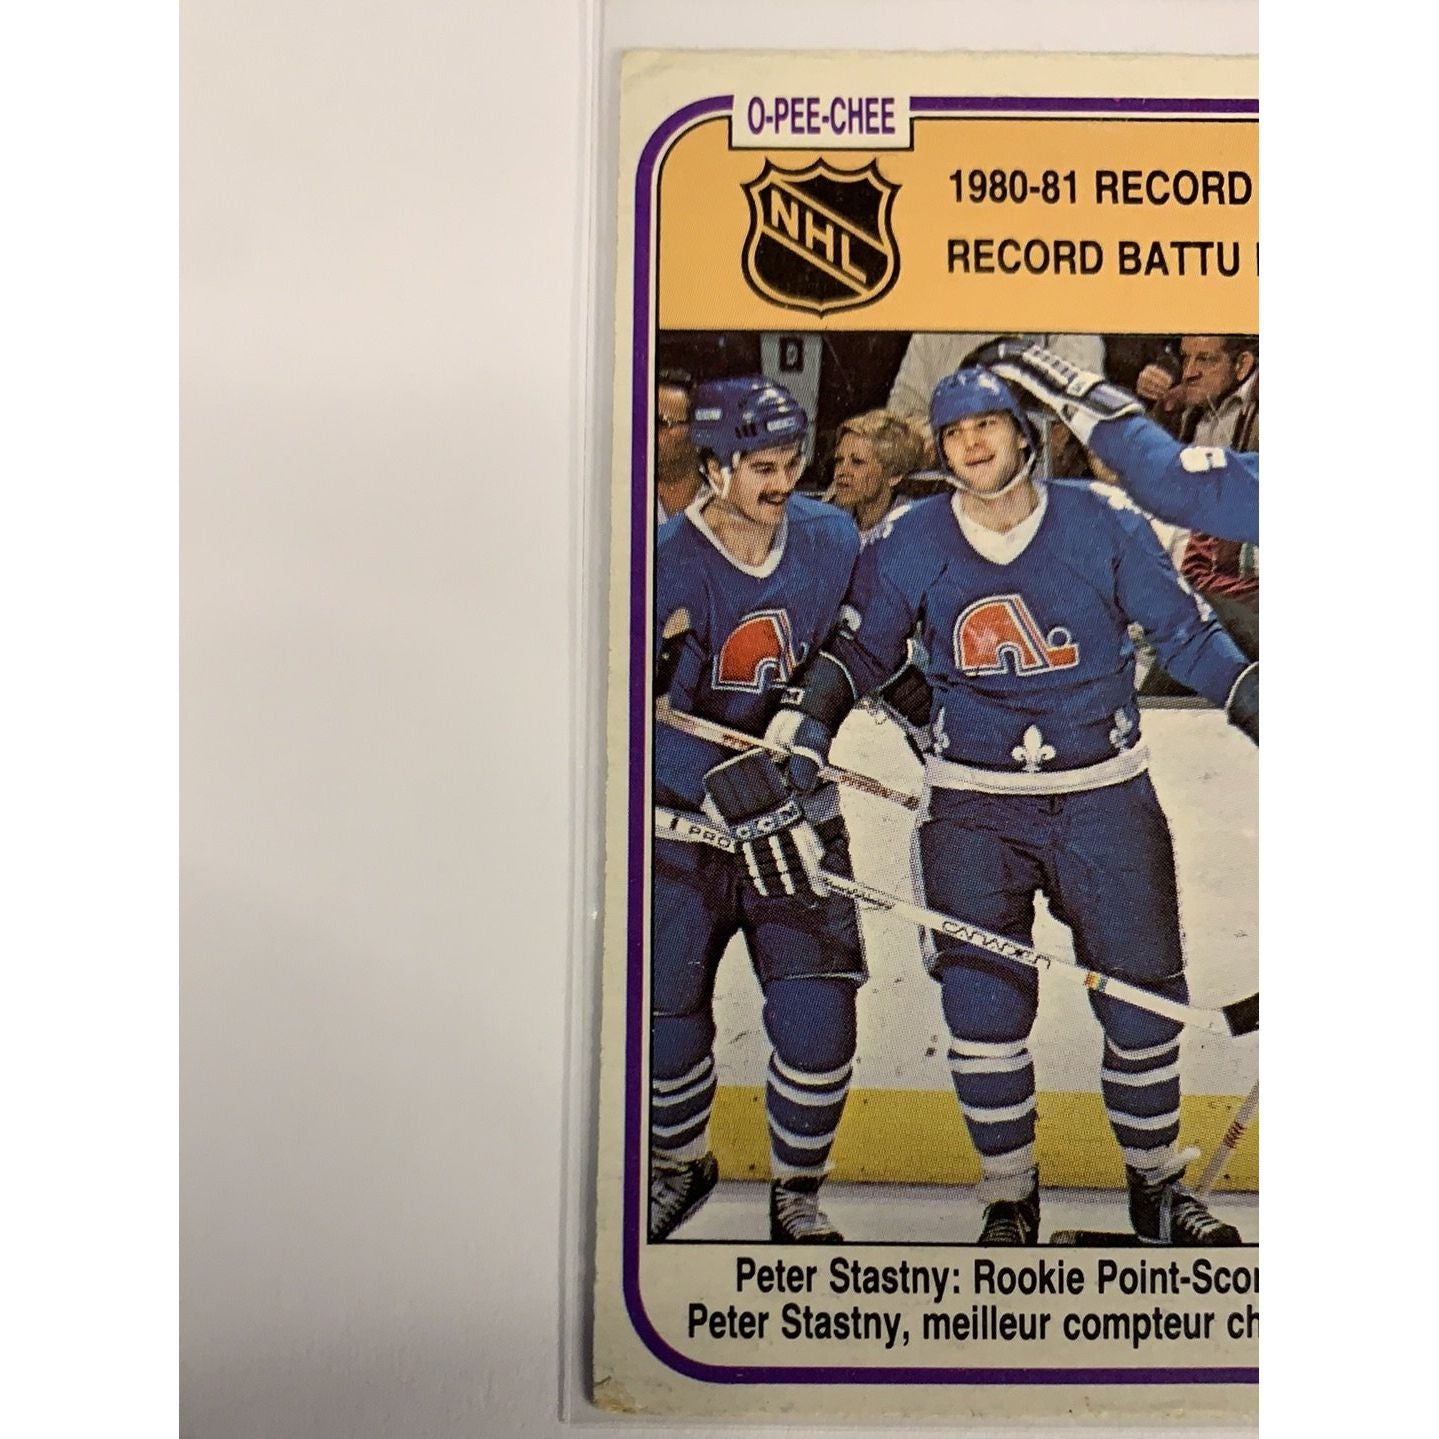  1981-82 O-Pee-Chee Peter Stastny Record Breakers  Local Legends Cards & Collectibles